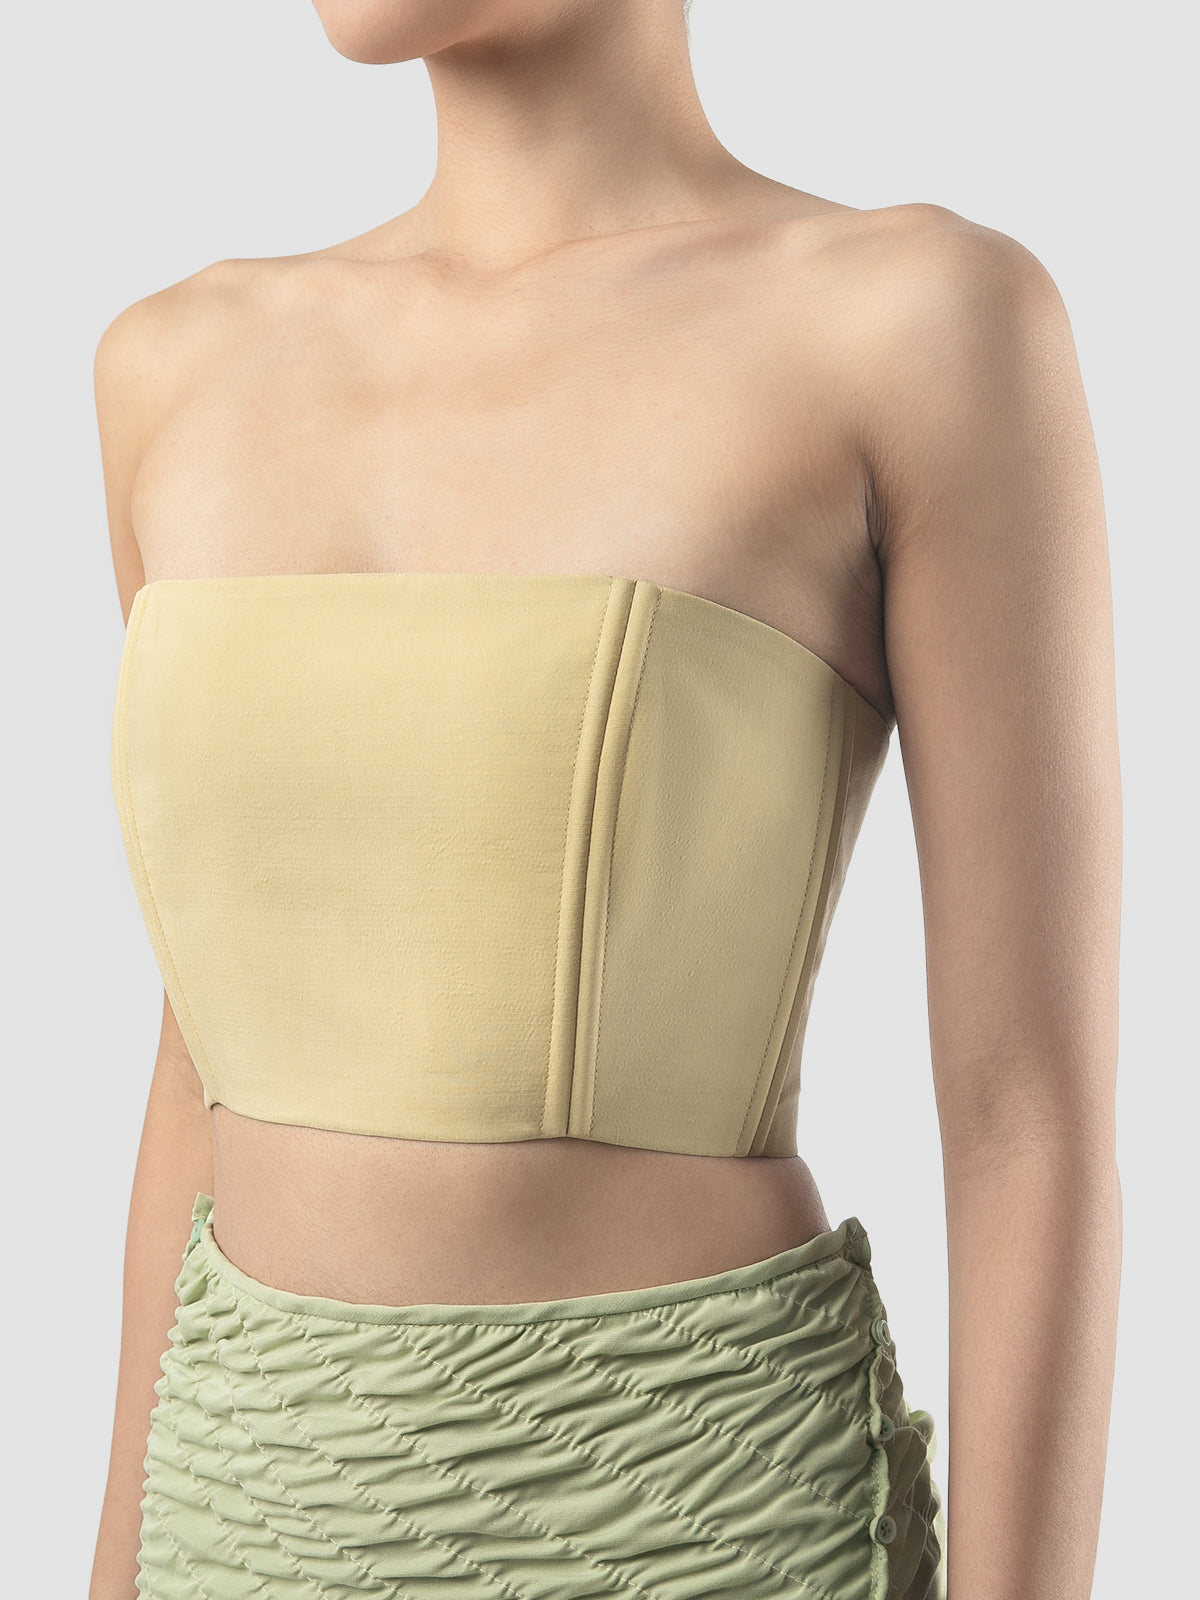 Powder yellow bustier bandeau with floral zipper